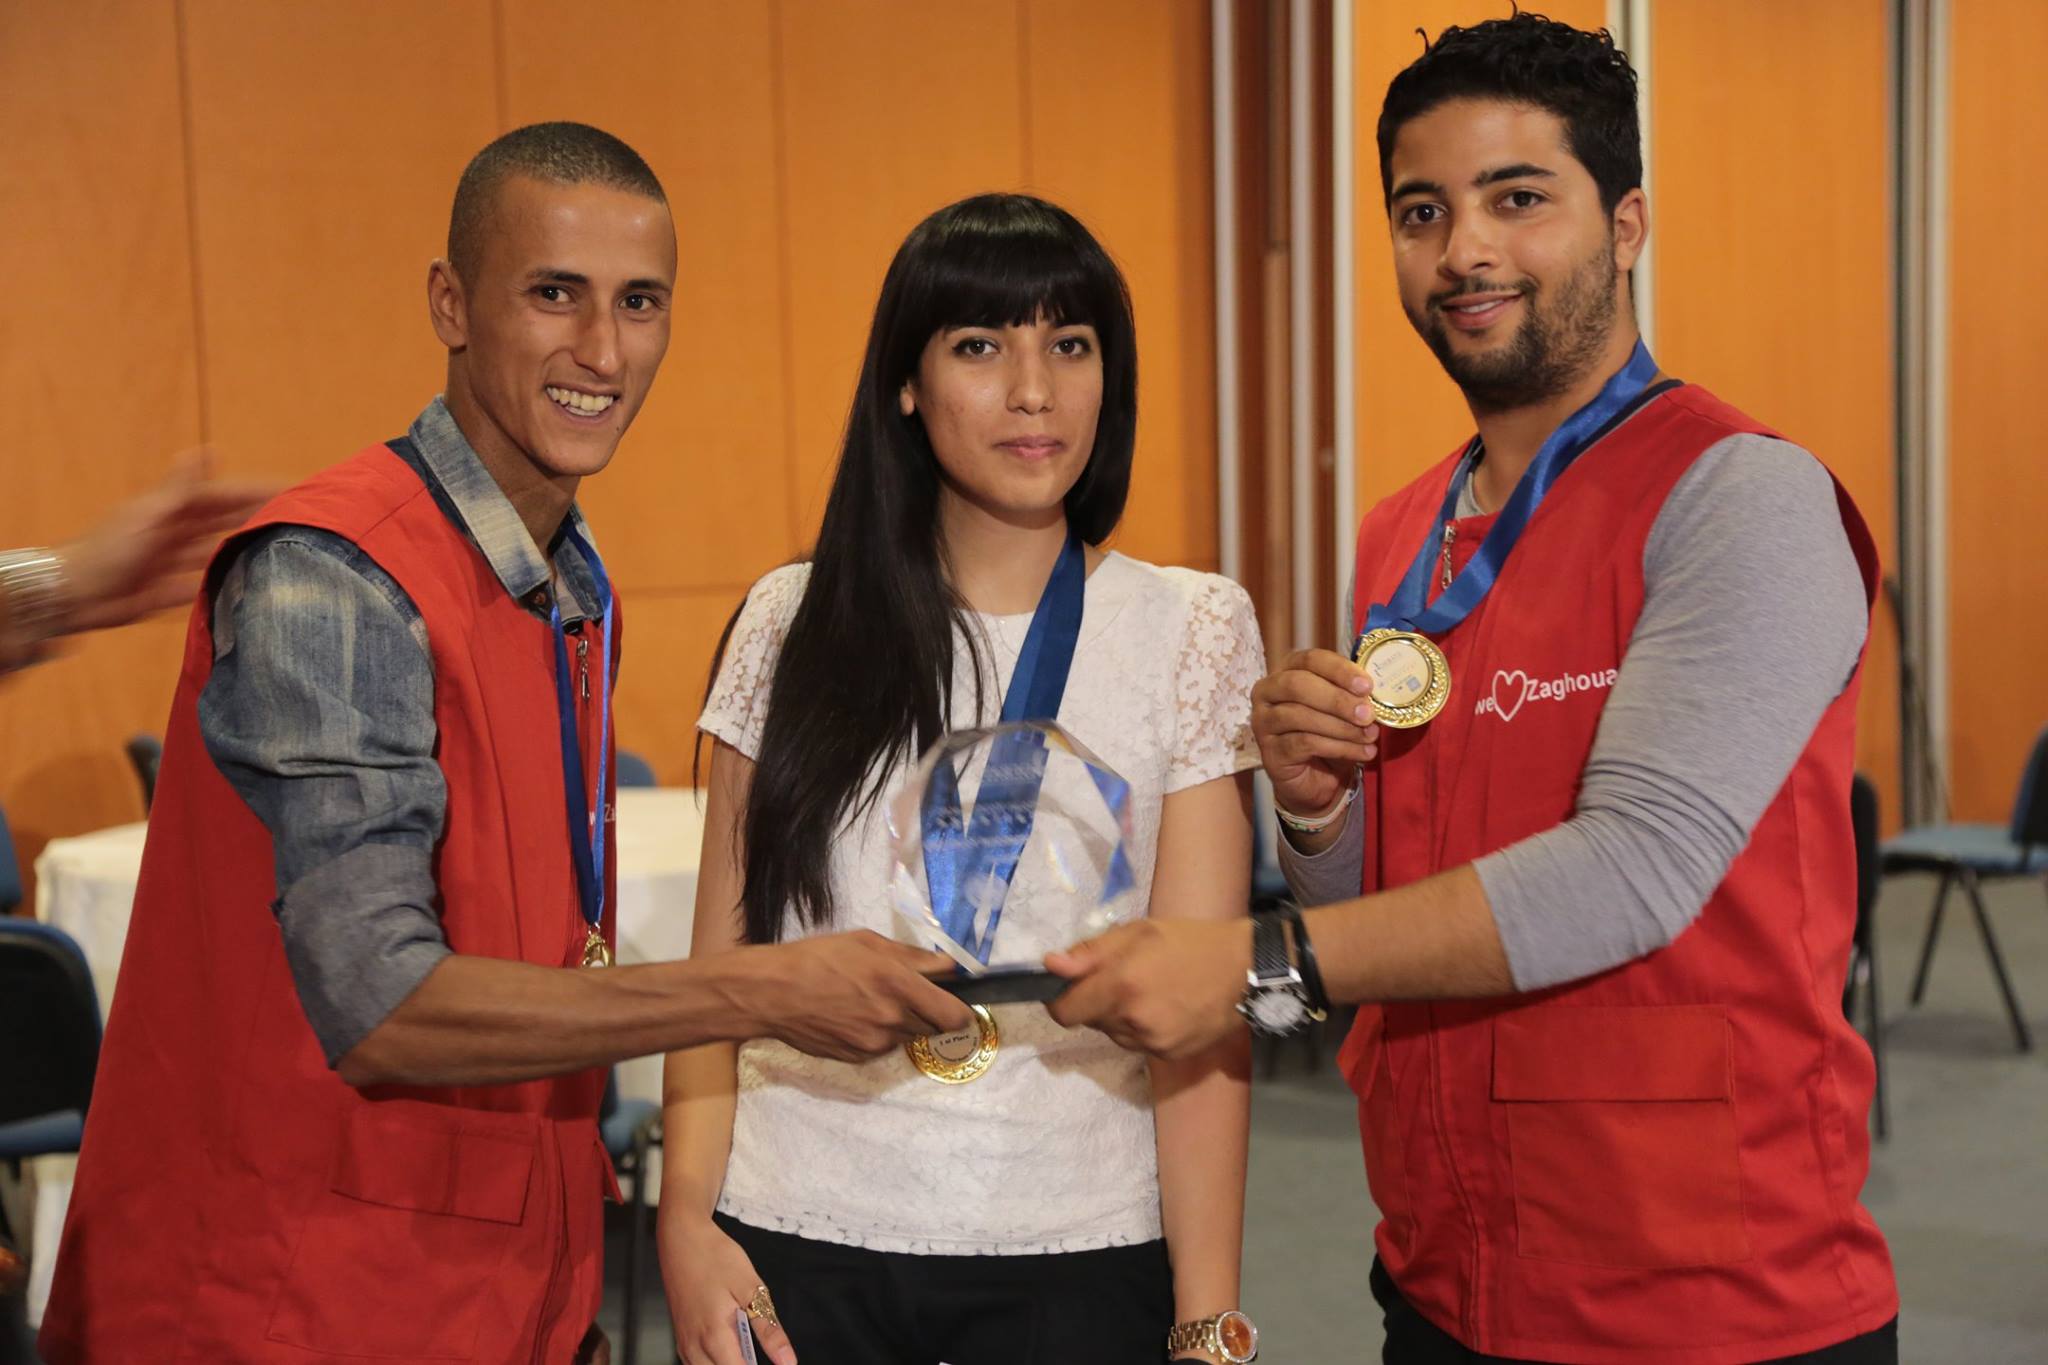 We Love Zaghouan, Winners of the Tunisian Youth Cares Challenge.